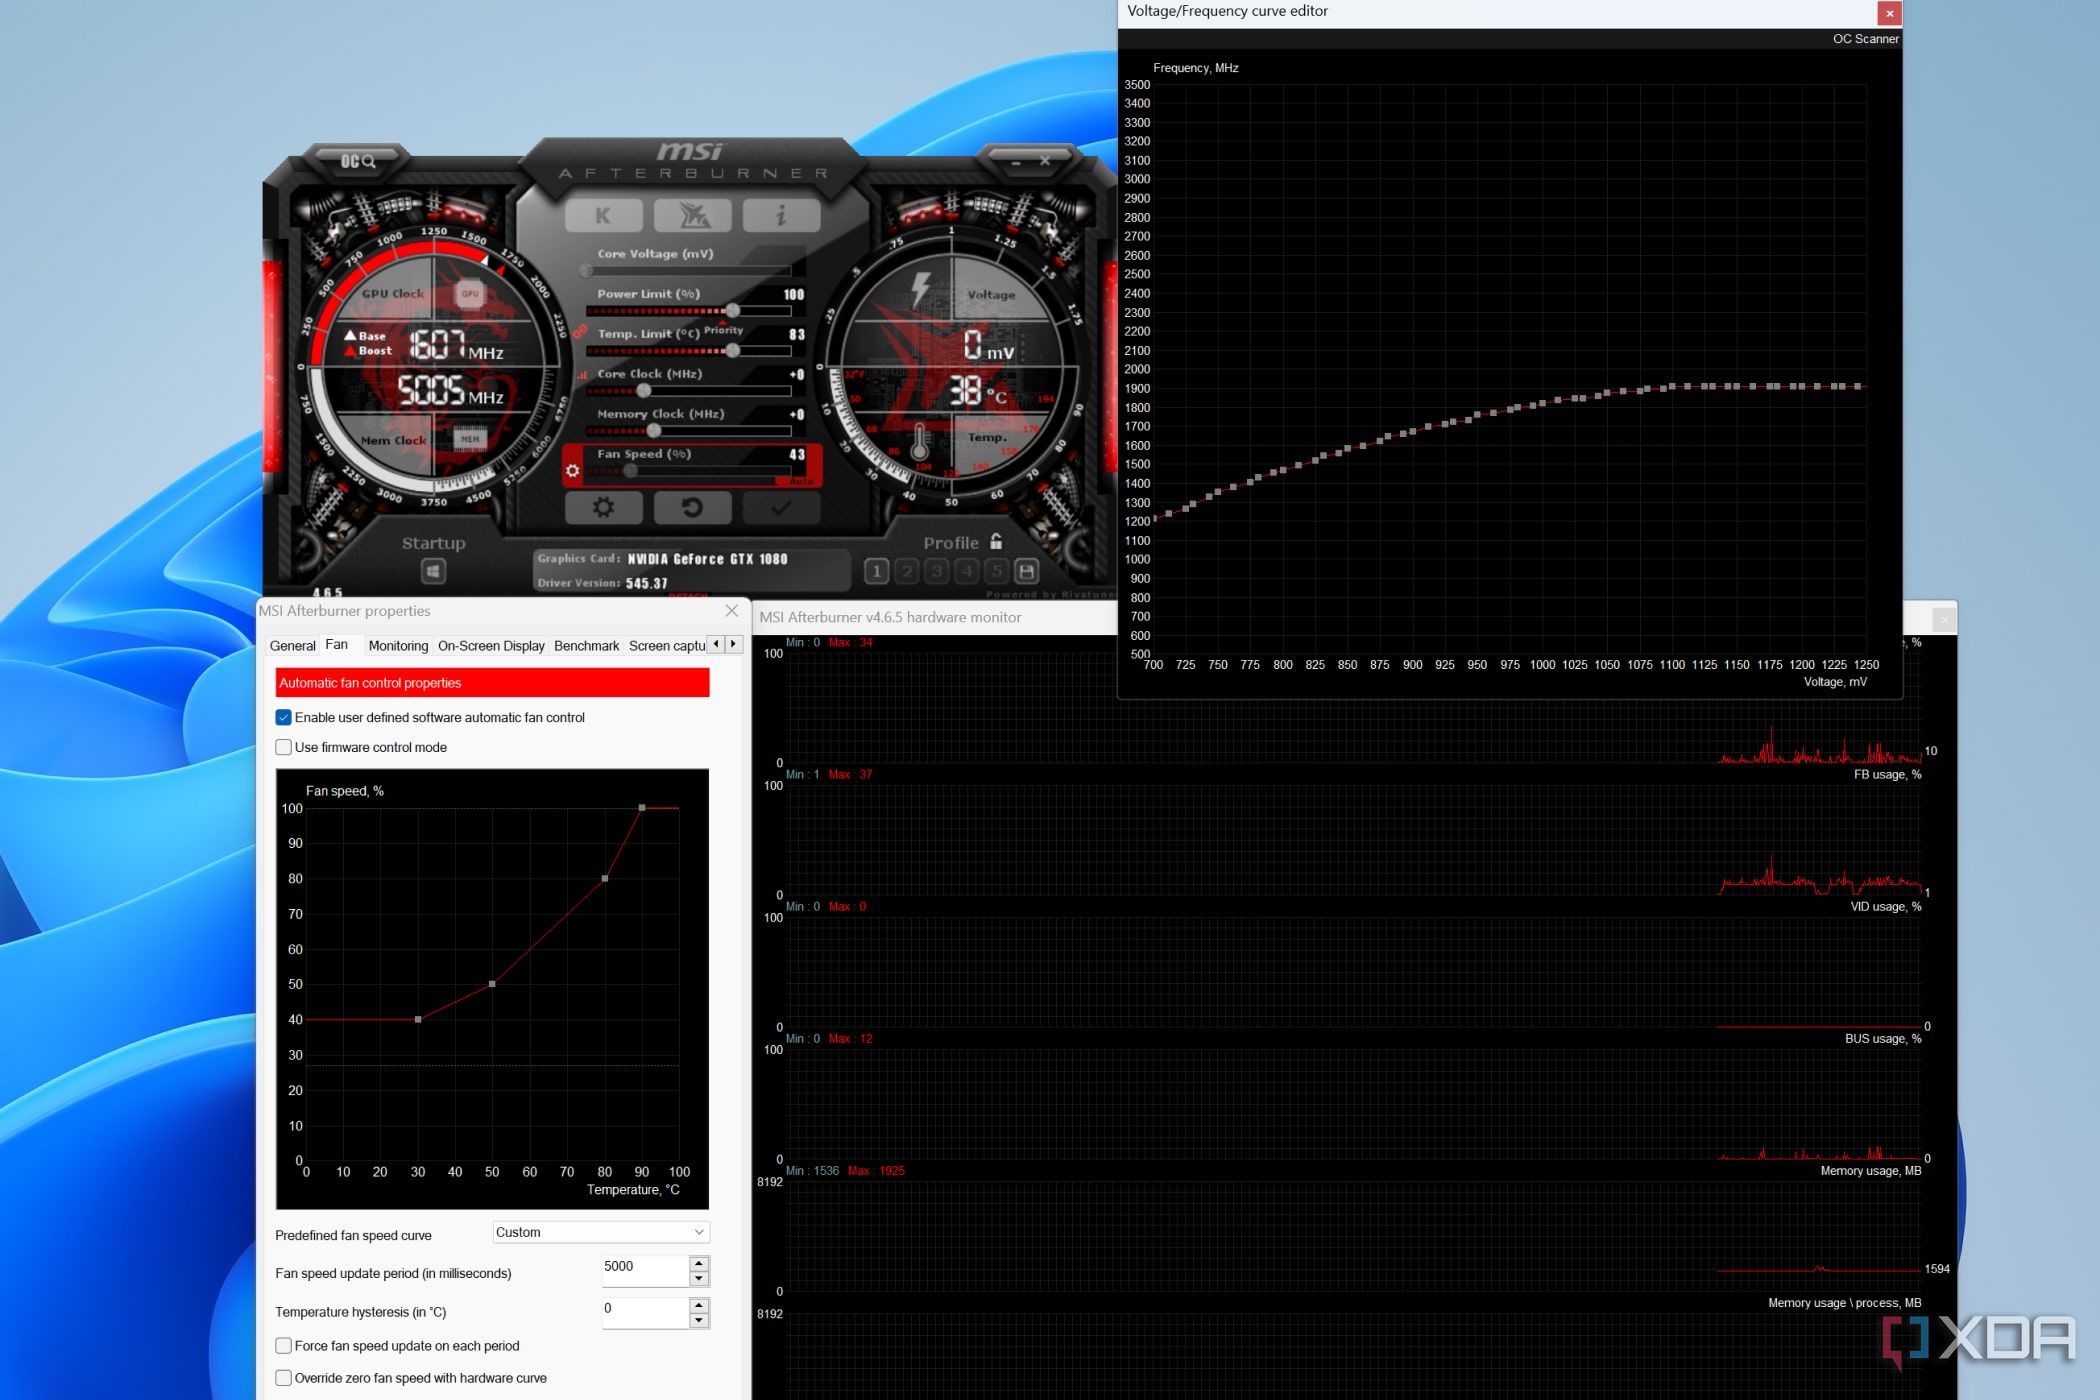 MSI Afterburner with its fan settings, hardware monitor, and curve editor windows